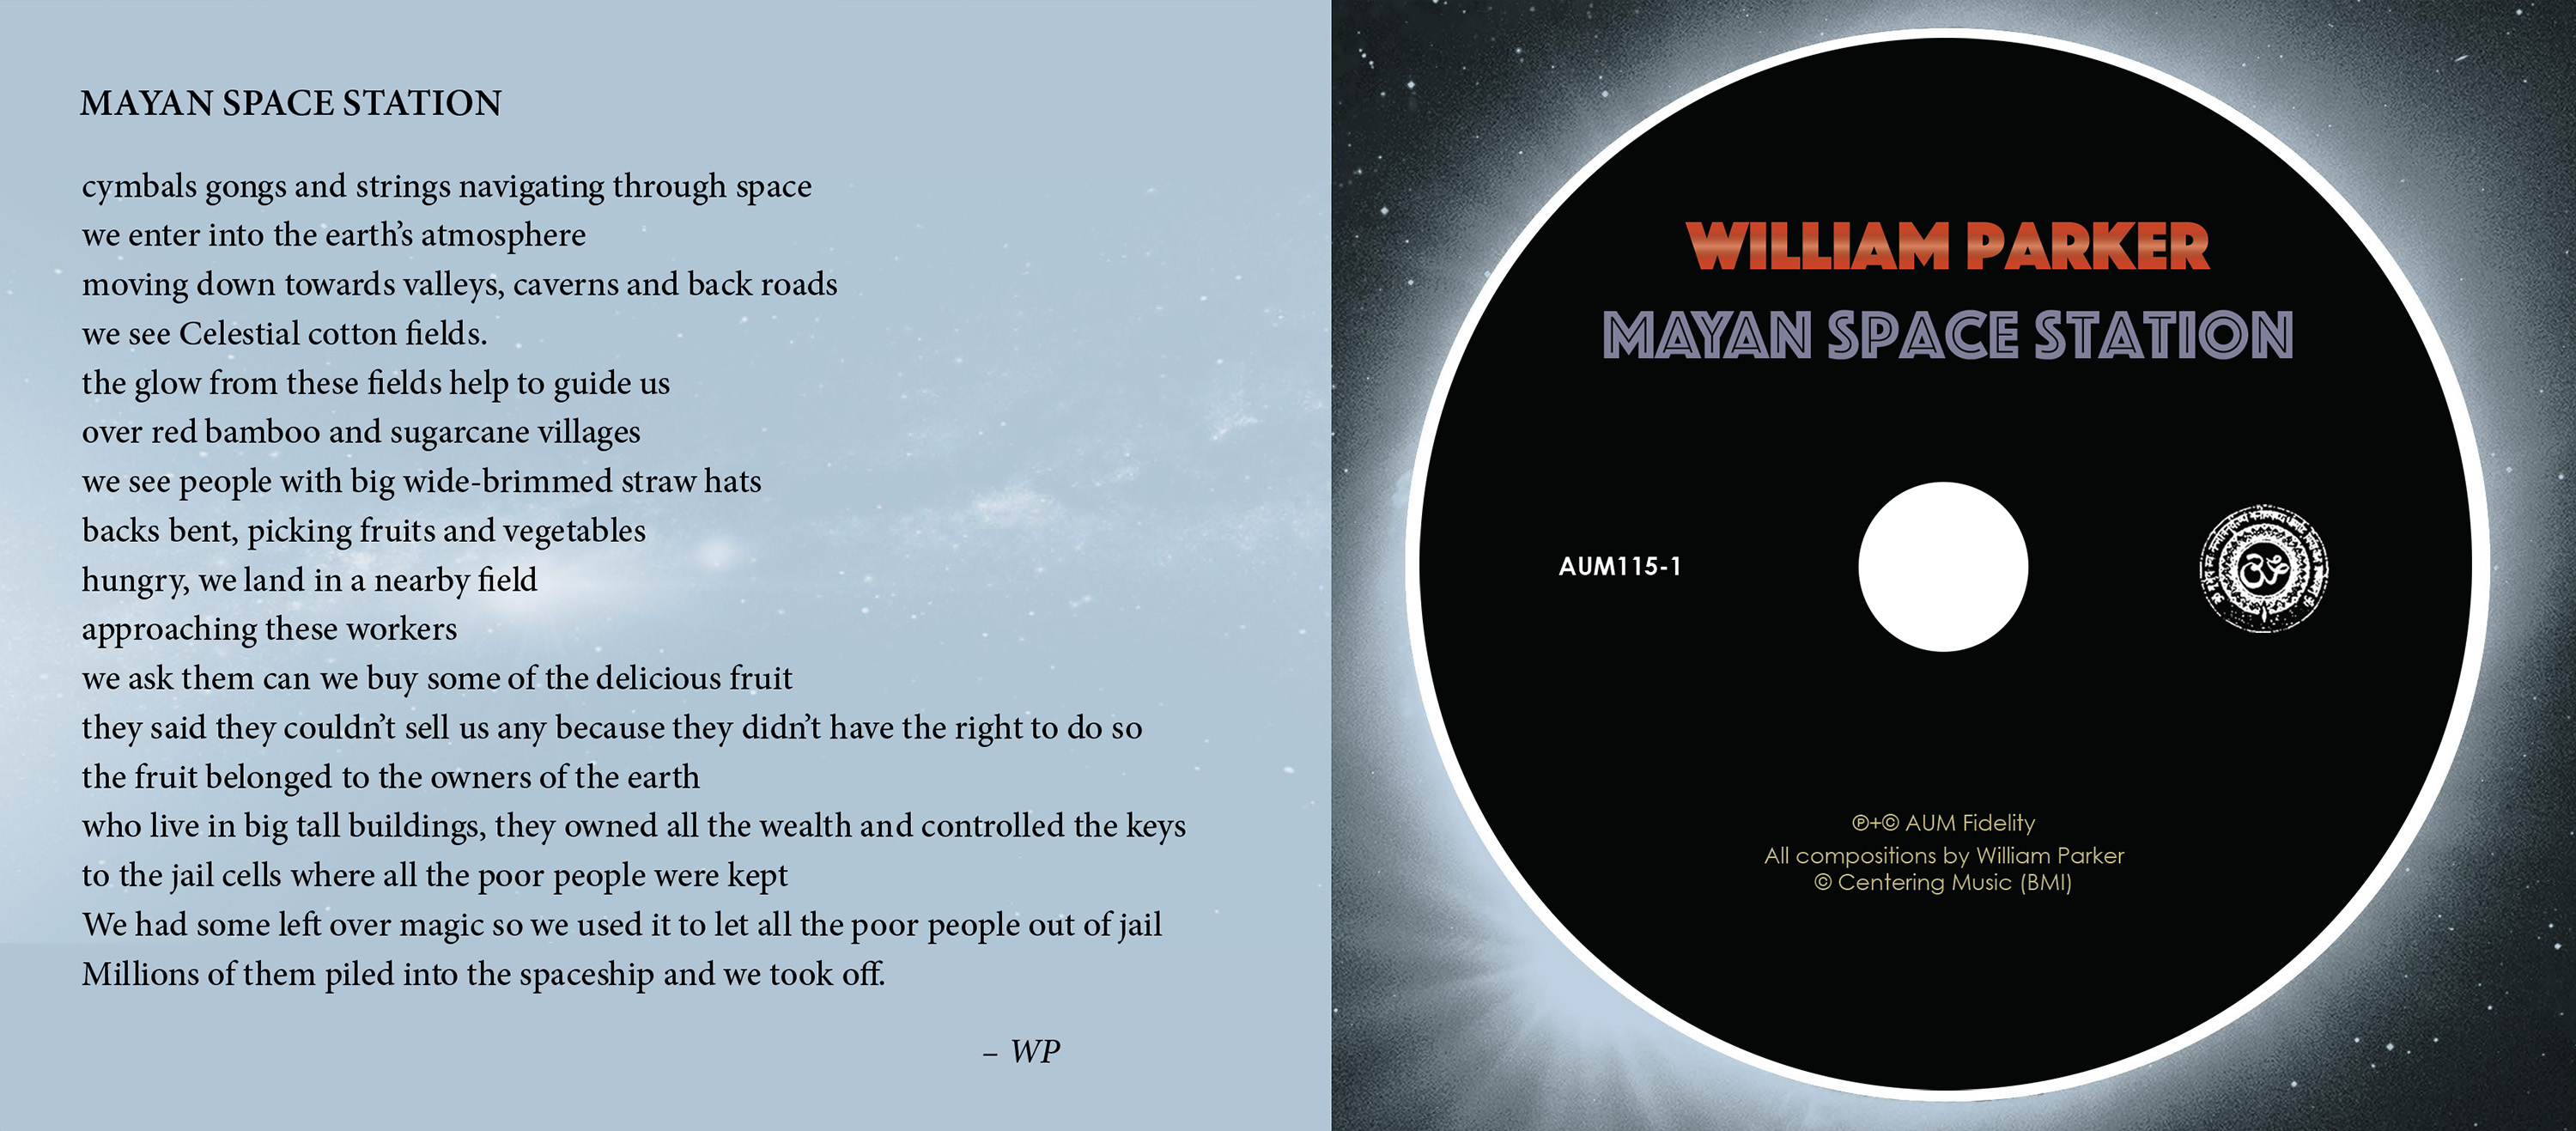 cd cd inside spread with cd in place for Mayan Space Station by William Parker